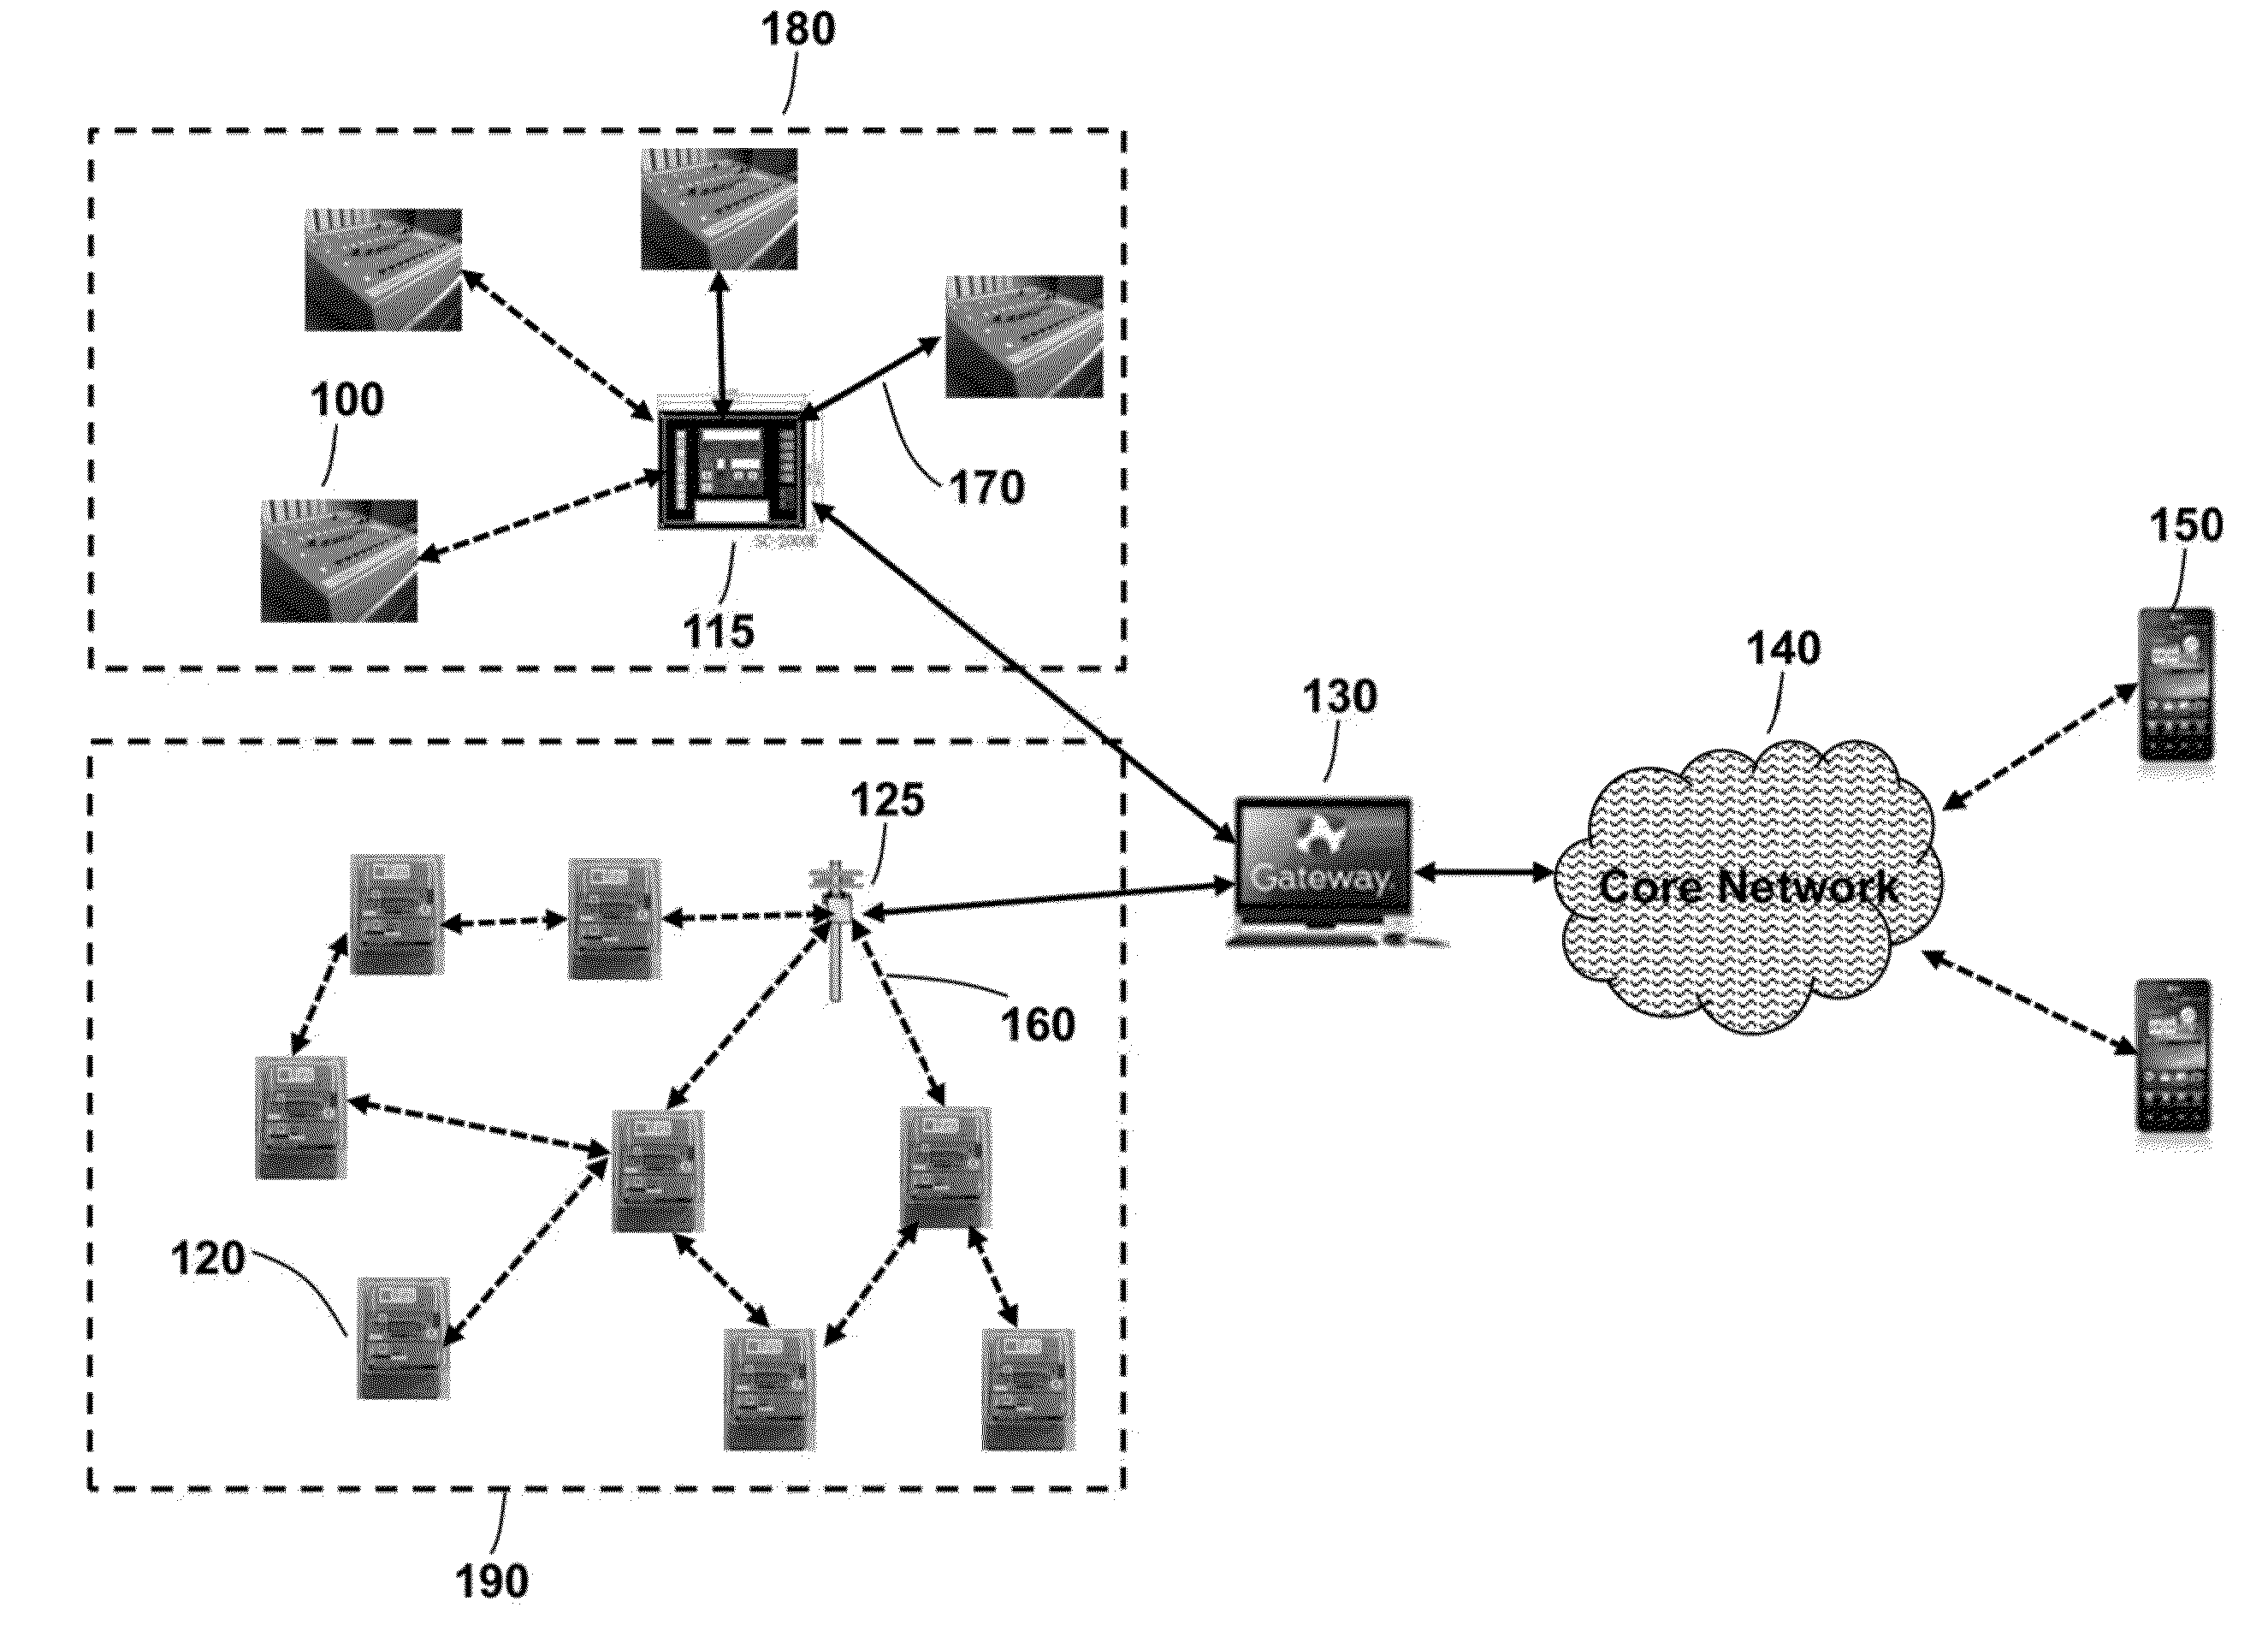 Method for Clustering Devices in Machine-to-Machine Networks to Minimize Collisions